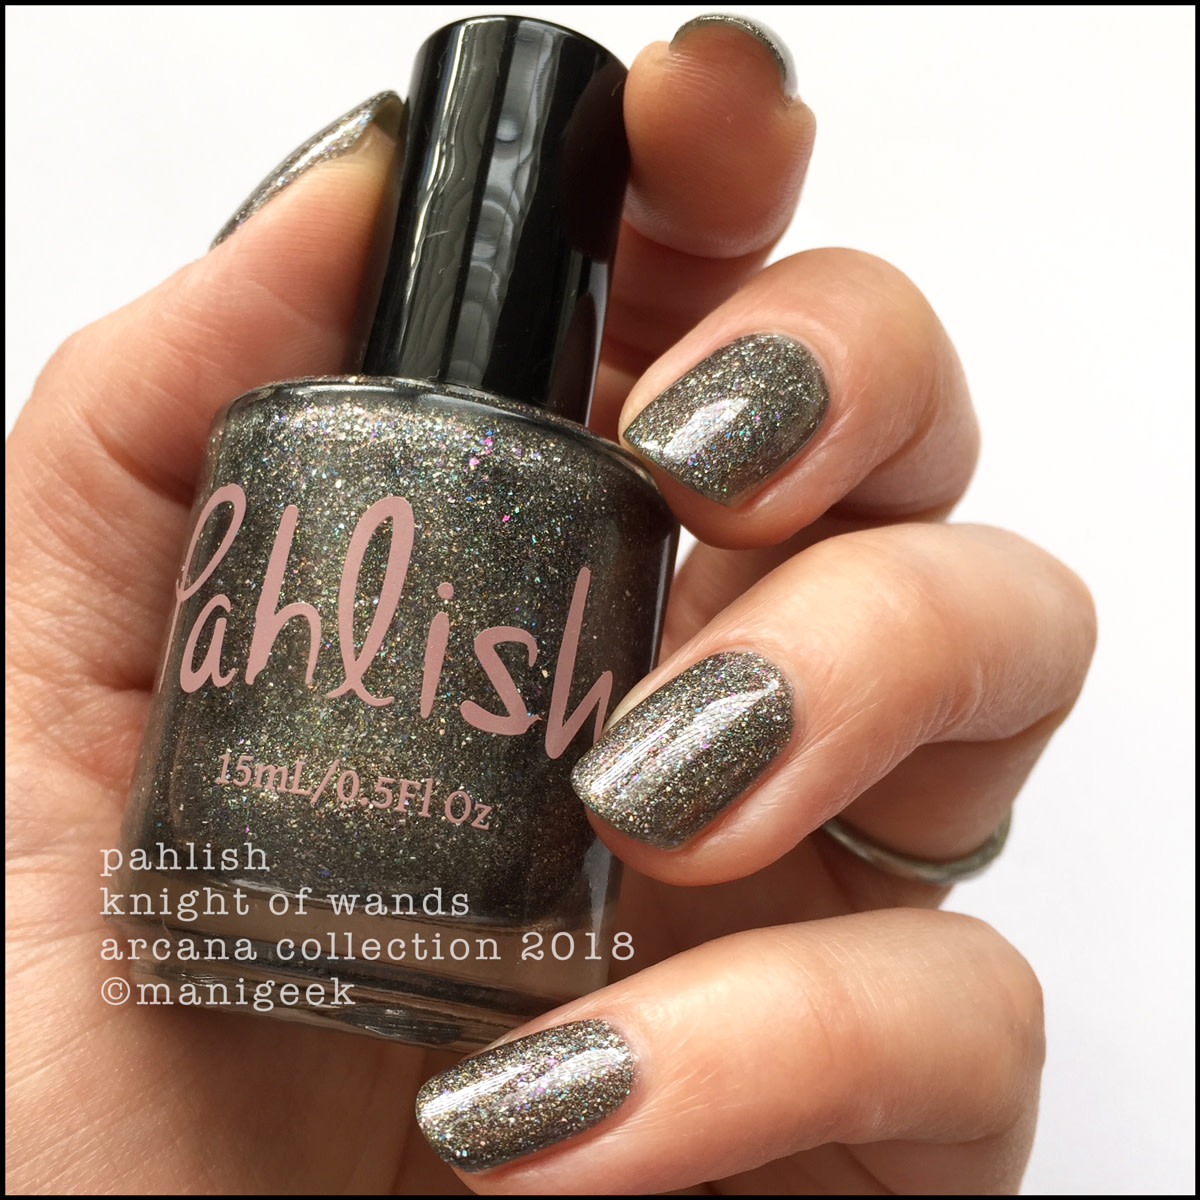 Pahlish Knight of Wands - Pahlish Arcana Collection Swatches Review 2018